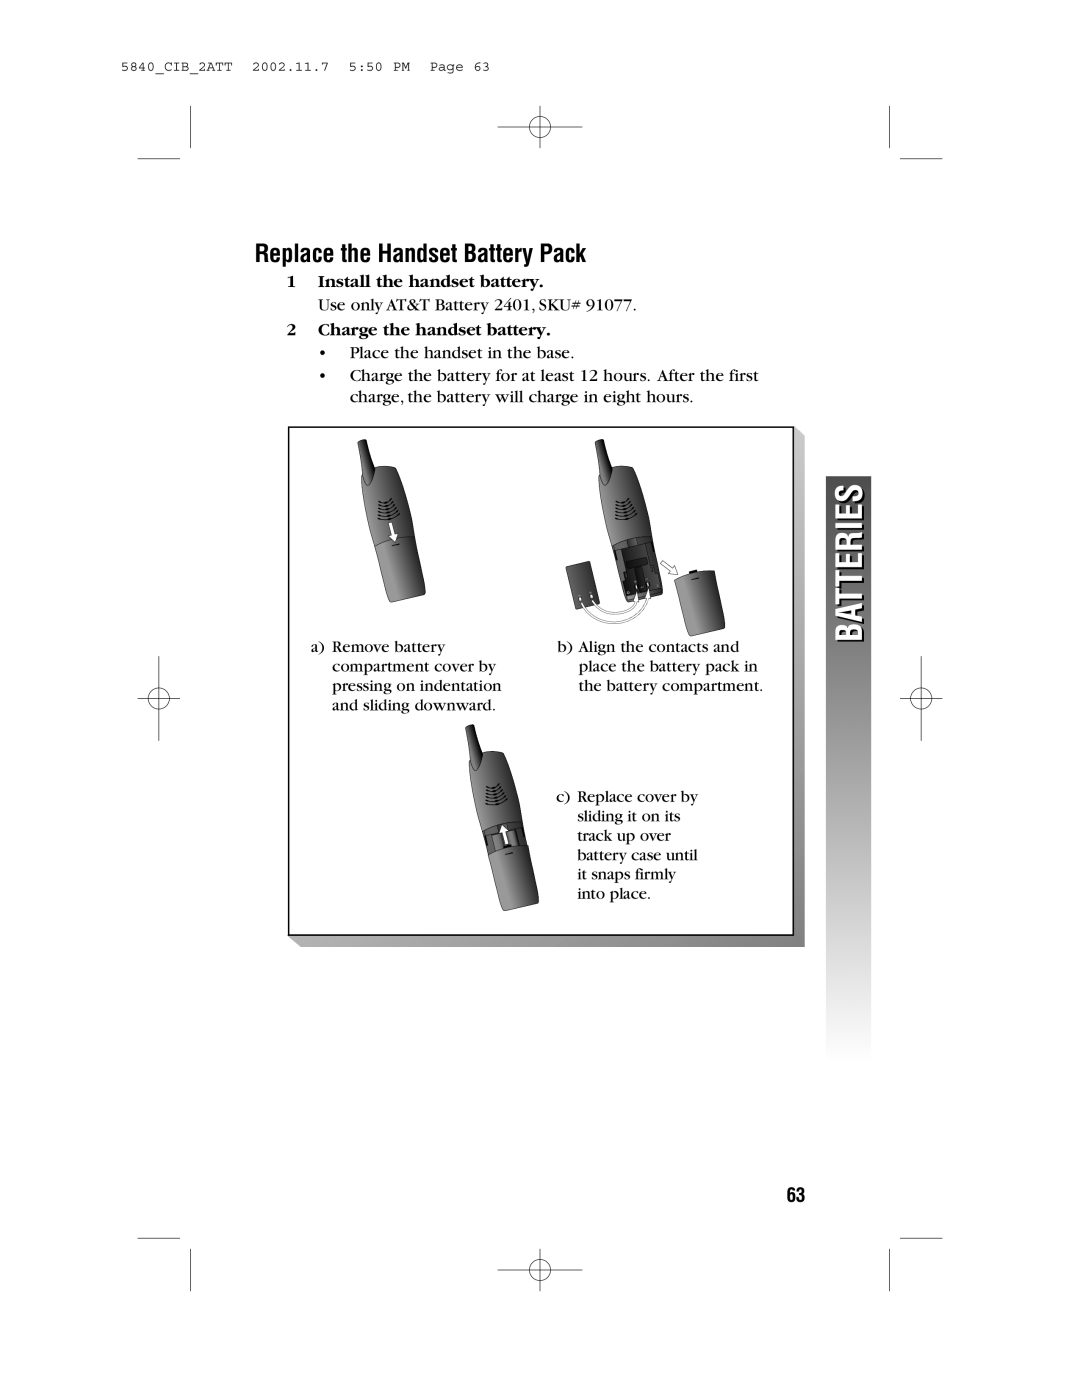 AT&T 5840 user manual Replace the Handset Battery Pack, Batteries, Install the handset battery, Charge the handset battery 